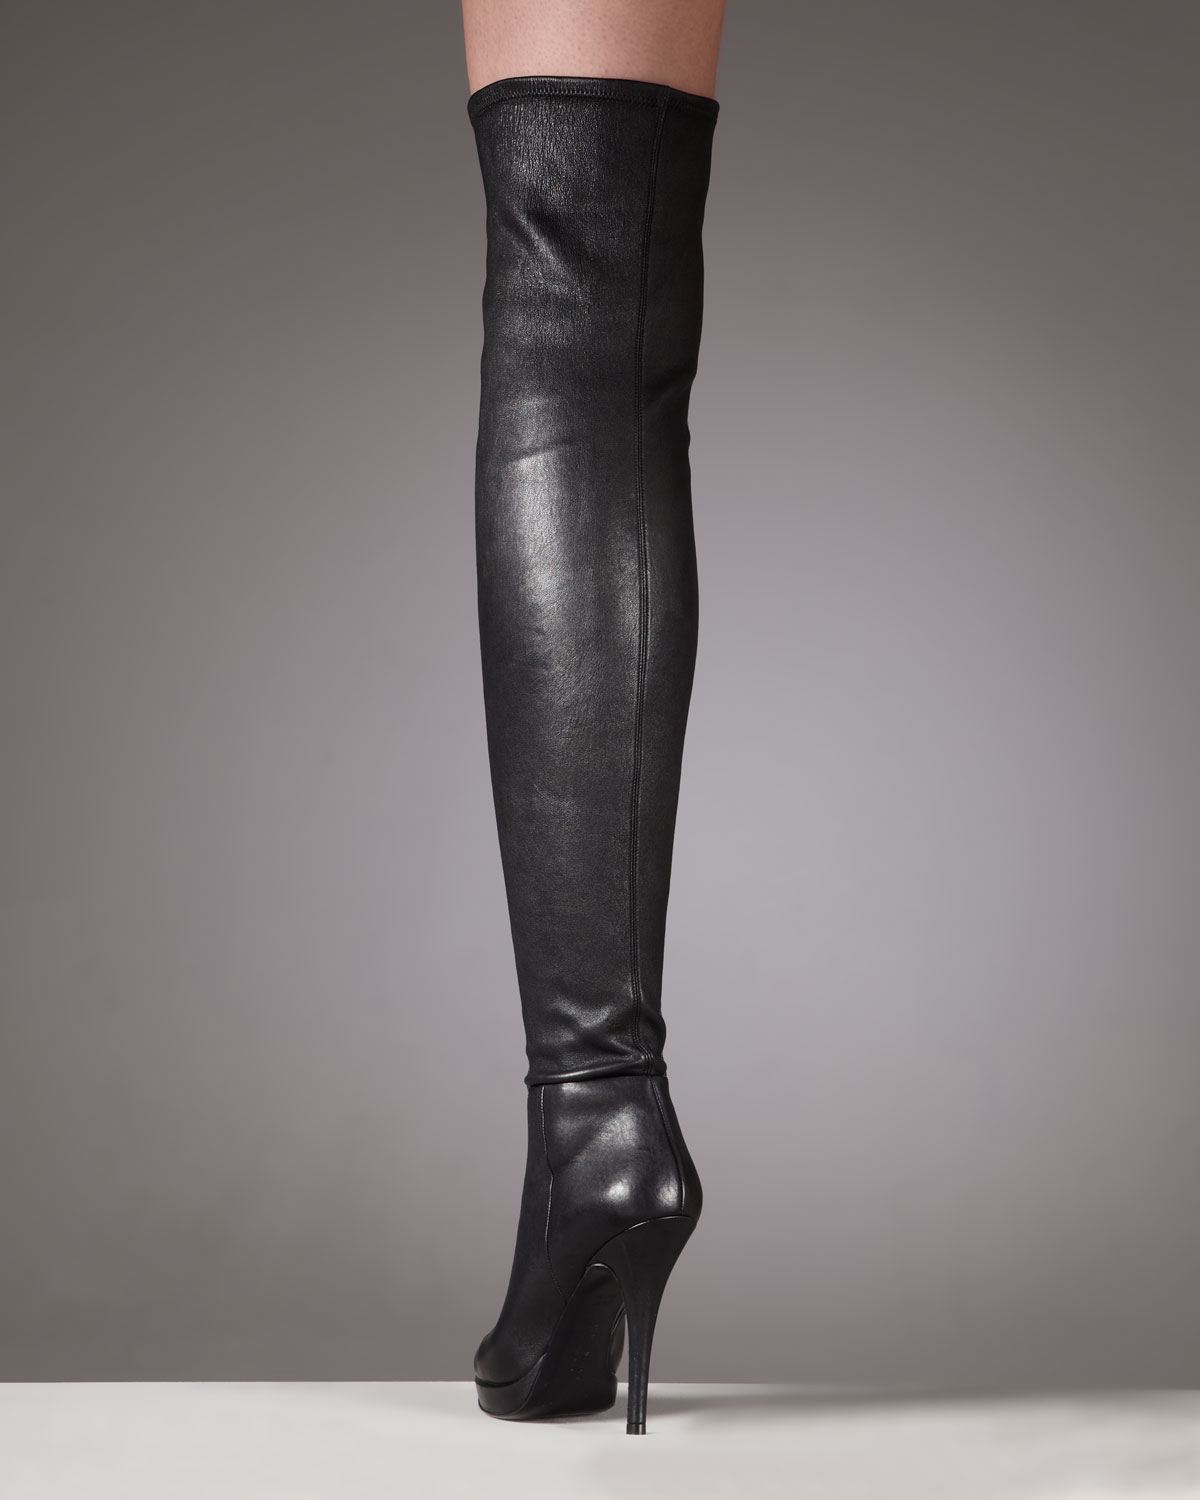 vera wang over the knee boots